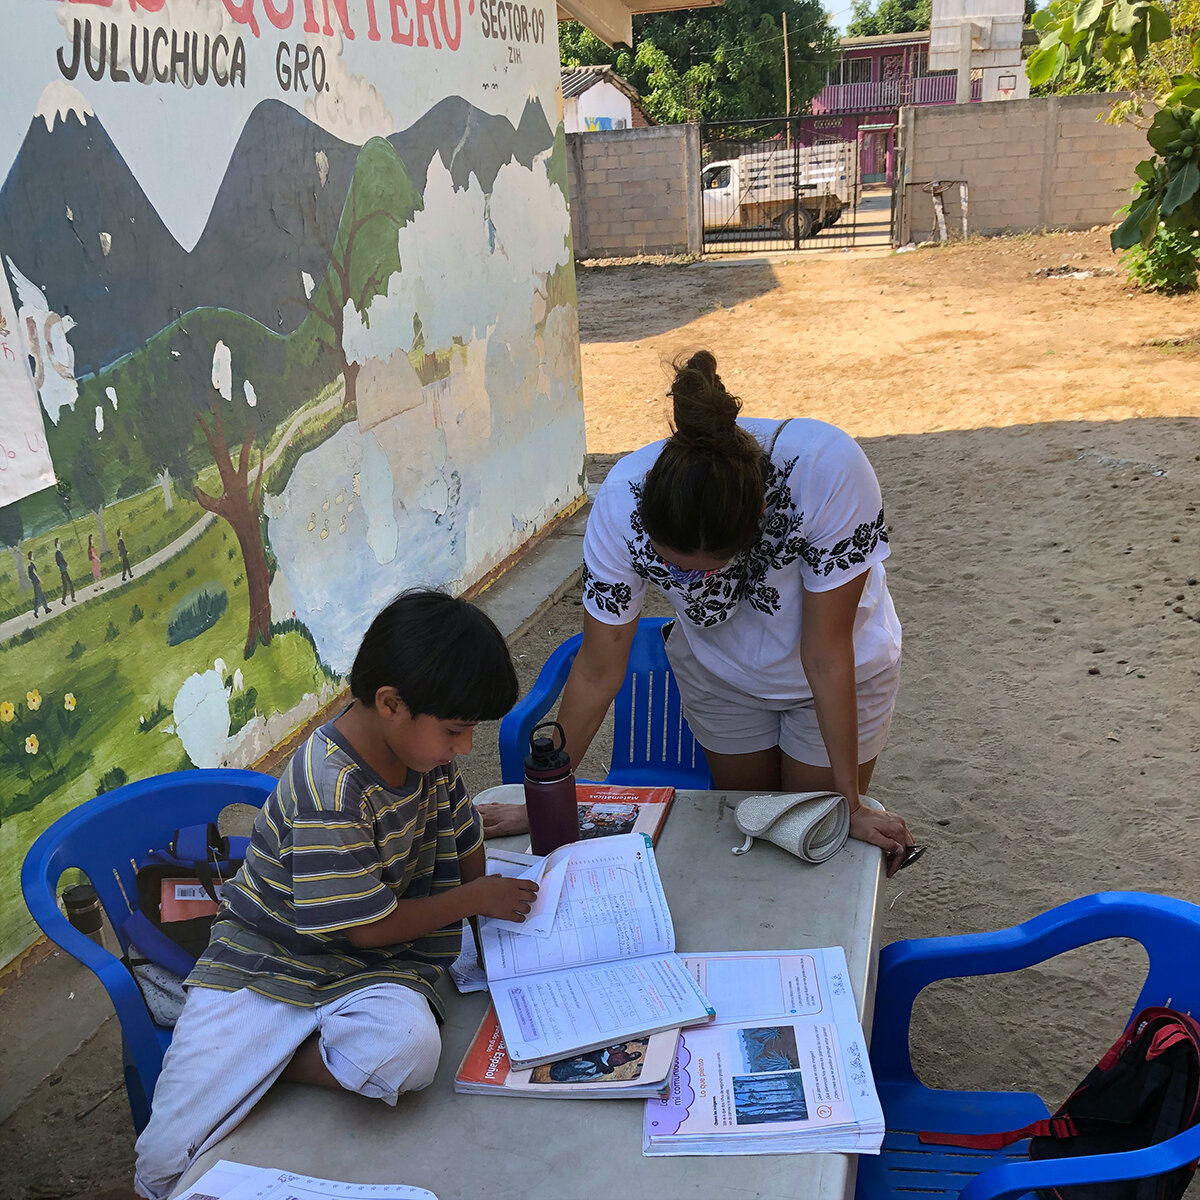  Partner Paty Vazquez, of Radix Education, learning from students at the Juluchuca primary school. 